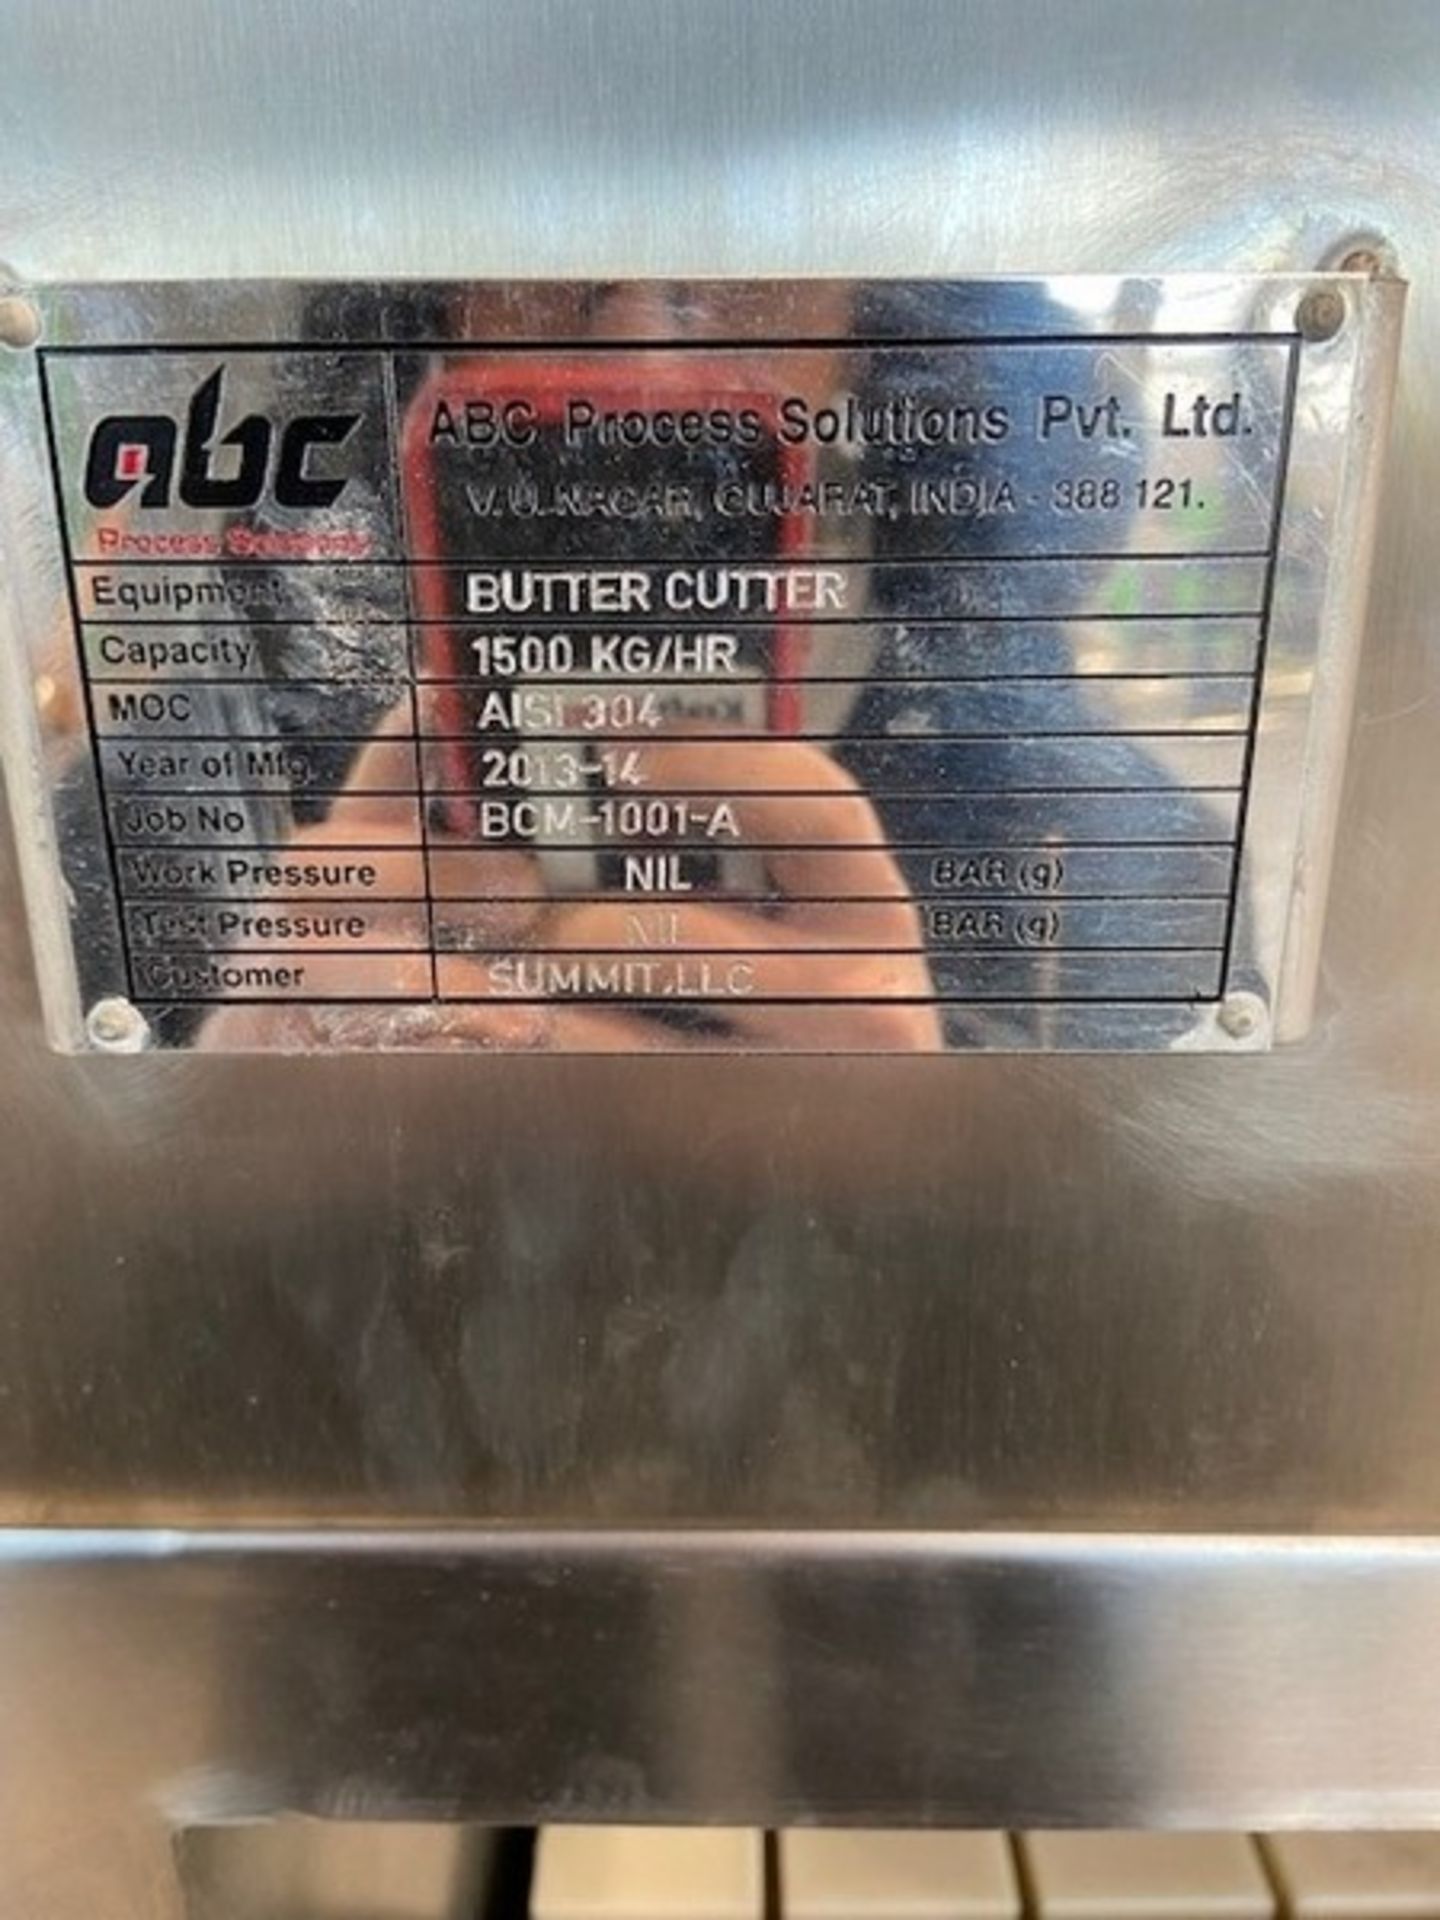 2013/2014 ABC Butter Cutter,1500 KG/Hr., MOC: AISI304 (INV#80101)(Located @ the MDG Auction Showroom - Bild 3 aus 3